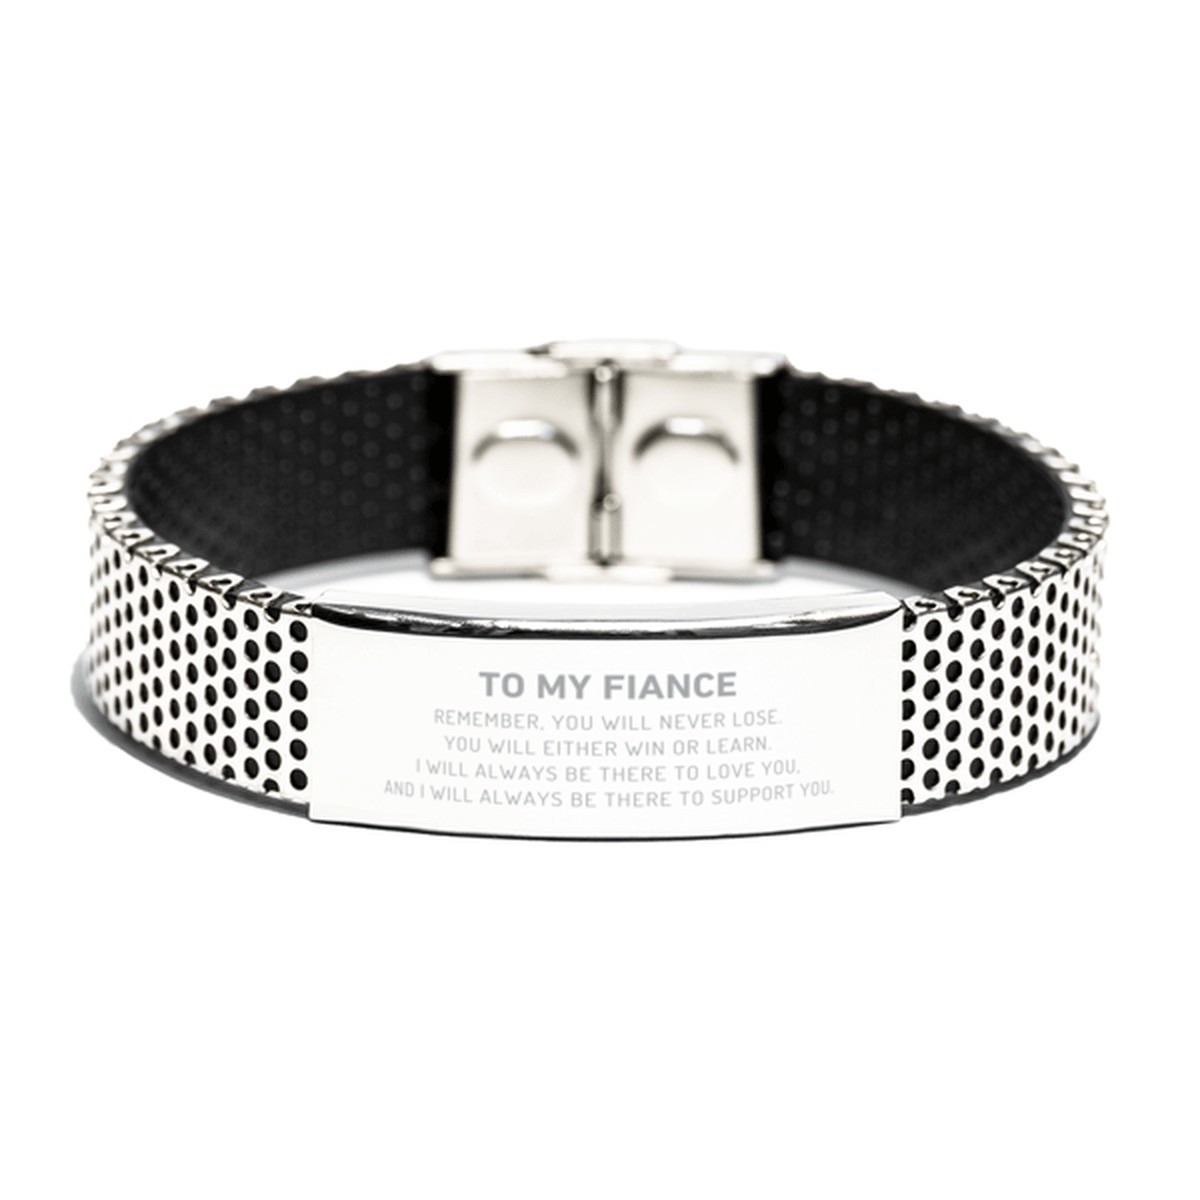 Fiance Gifts, To My Fiance Remember, you will never lose. You will either WIN or LEARN, Keepsake Stainless Steel Bracelet For Fiance Engraved, Birthday Christmas Gifts Ideas For Fiance X-mas Gifts